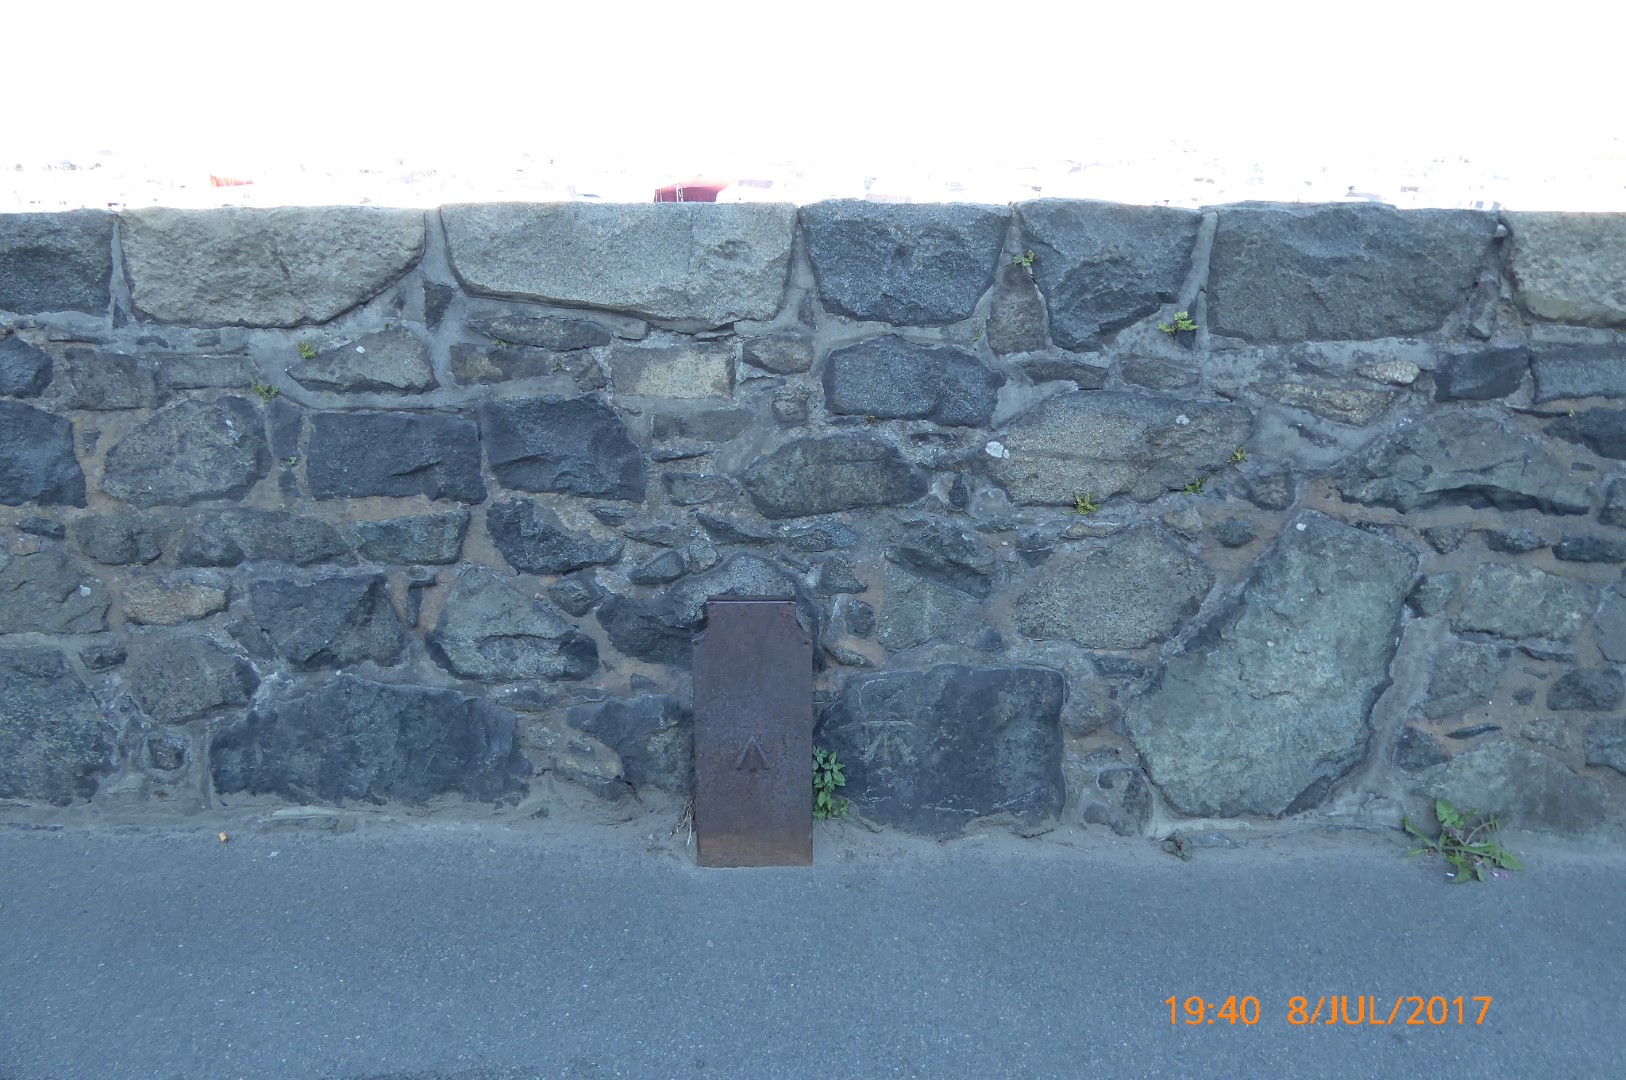 Telegraph cable marker post at E. side of Glategny Esplanade, St Peter Port, Guernsey by Jon Glew 